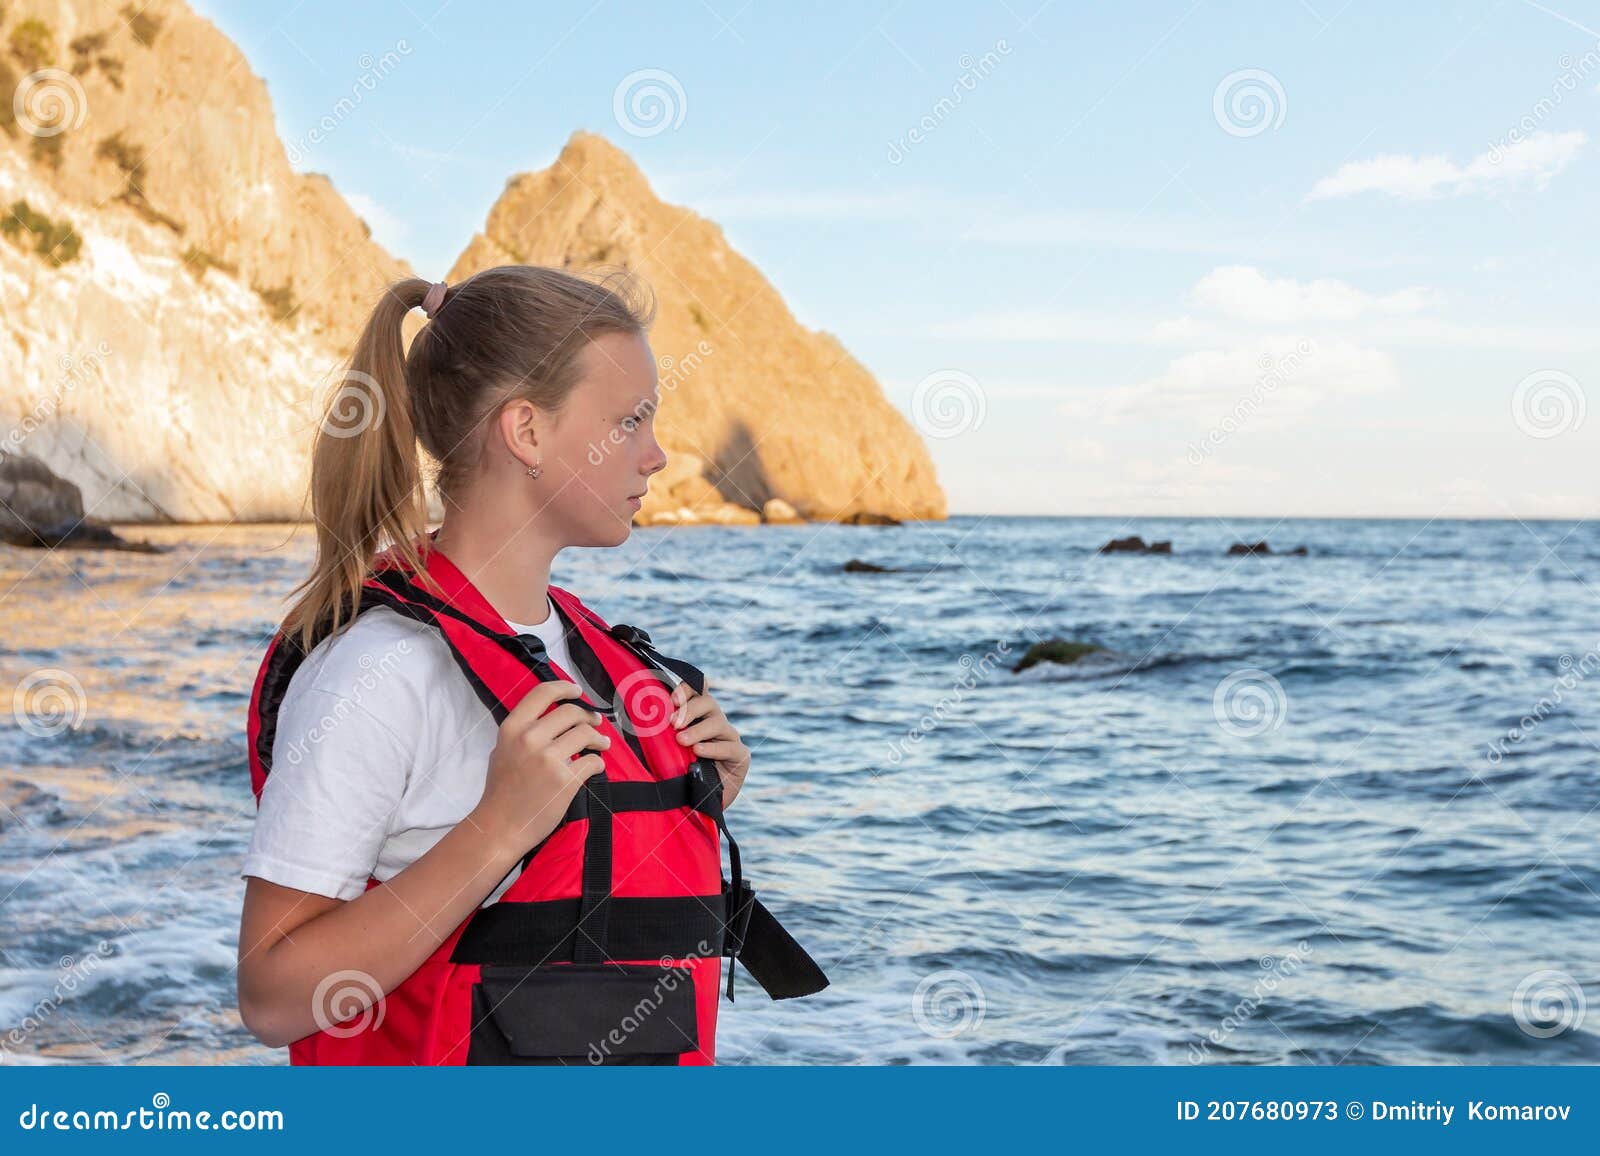 teenage girl in red life jacket stands on ocean and looks at sea. means of rescuing people on water, buoyancy and safety